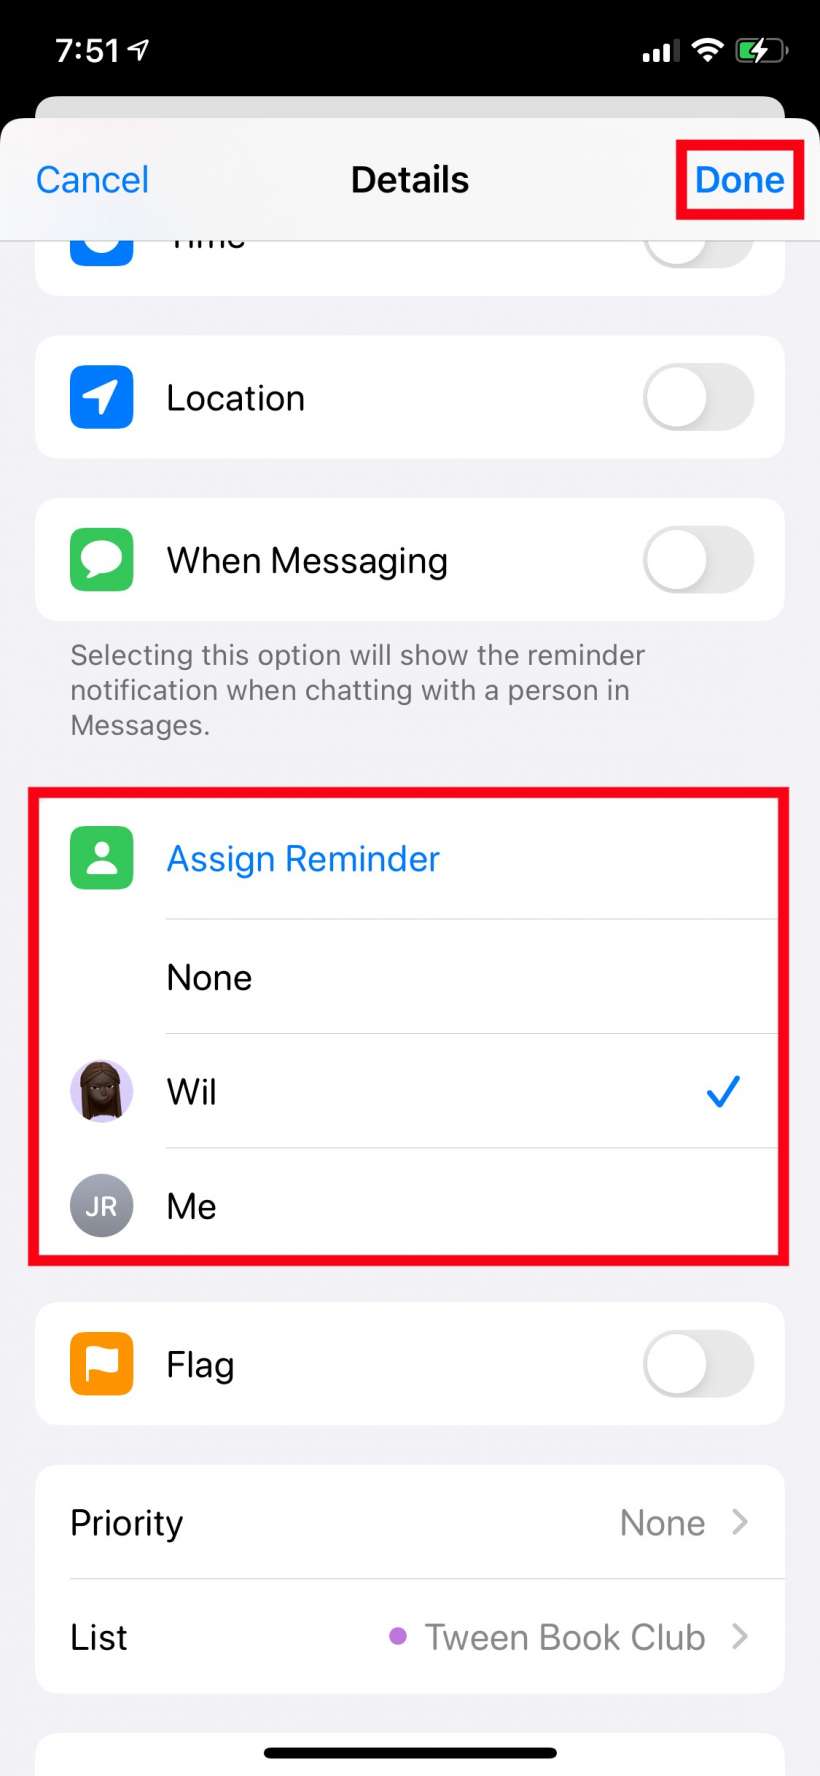 How to assign reminders in shared Reminder lists on iPhone and iPad.